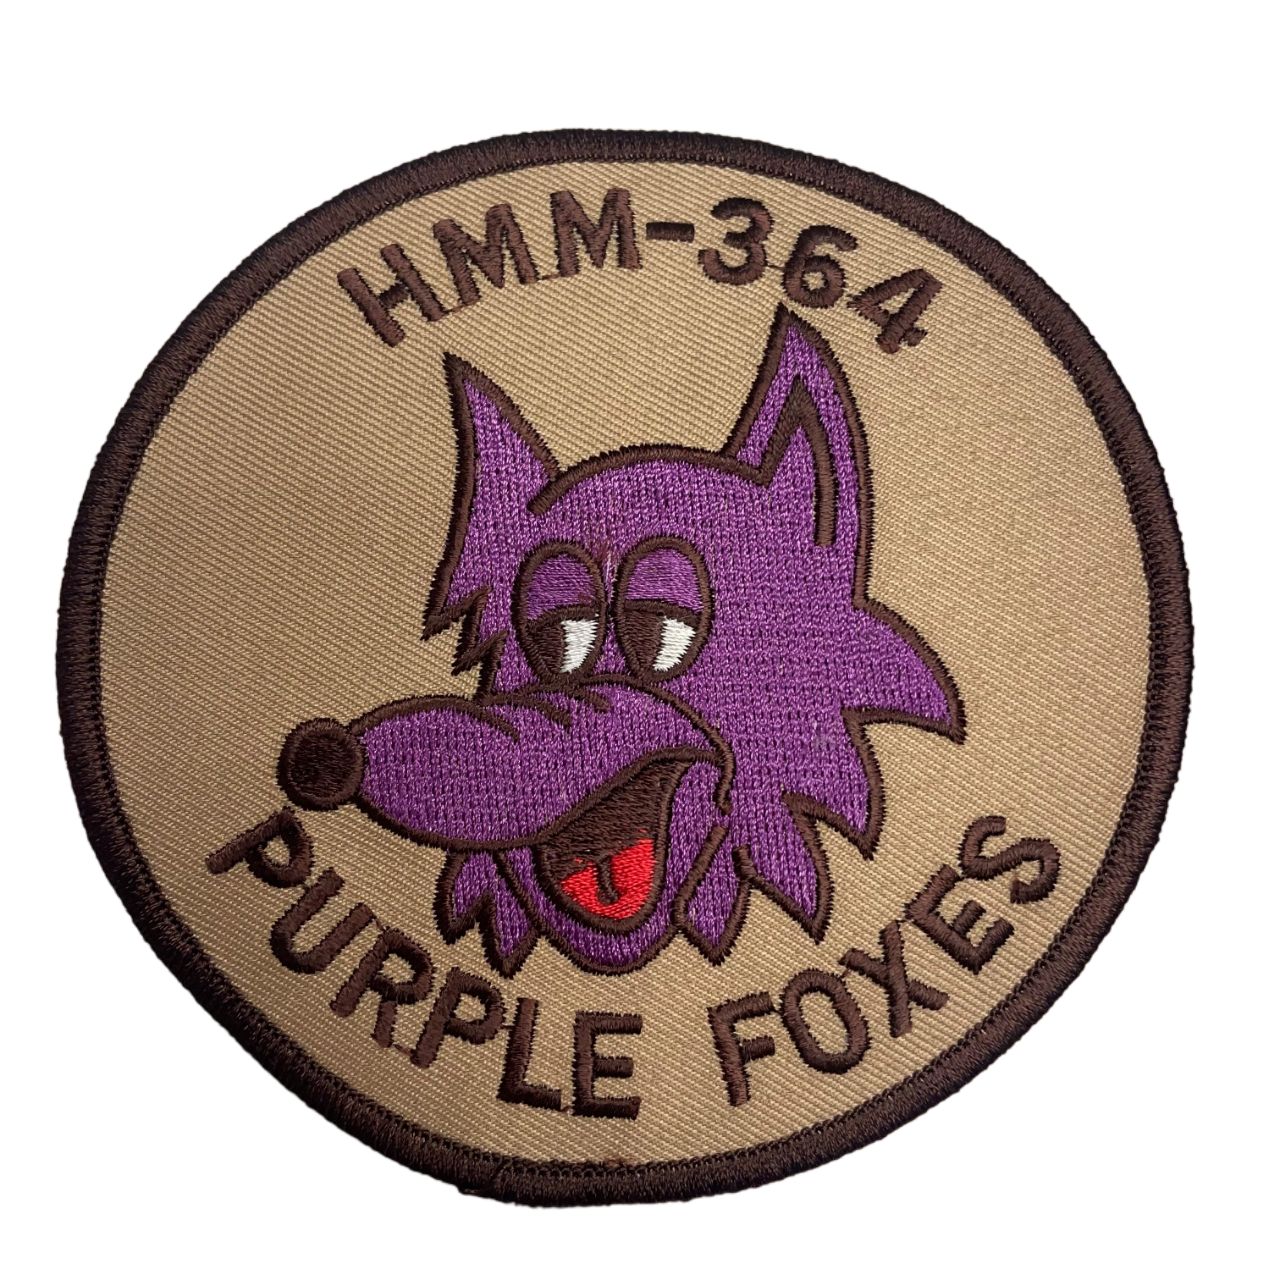 HMM-364 Squadron - Purple Foxes - Officially Licensed USMC Patch